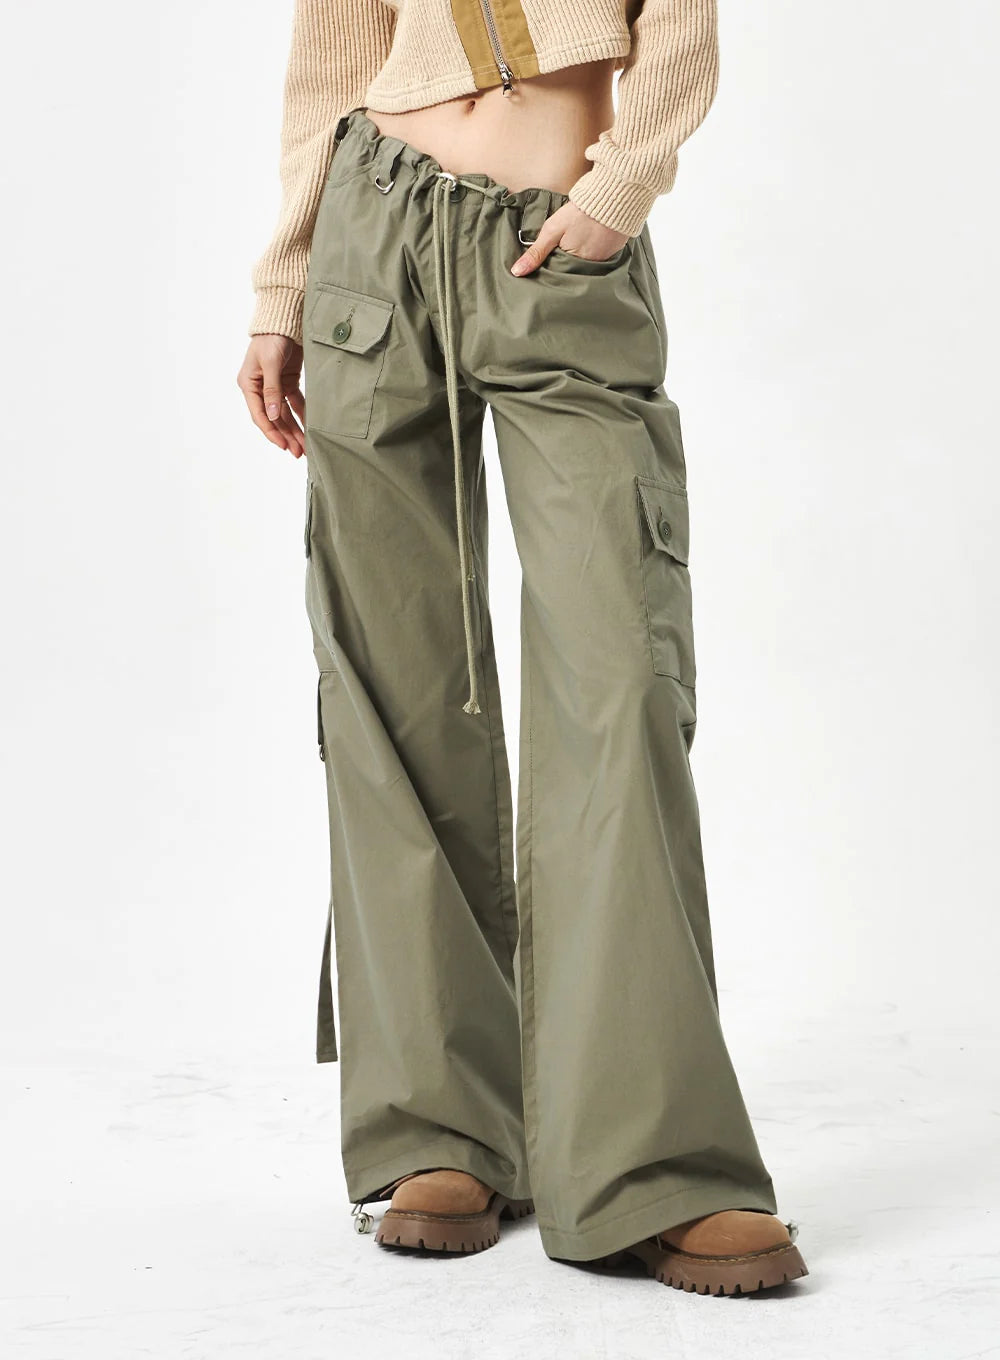 Bseka Summer Savings Clearance!Cargo Pants For Women With Pockets